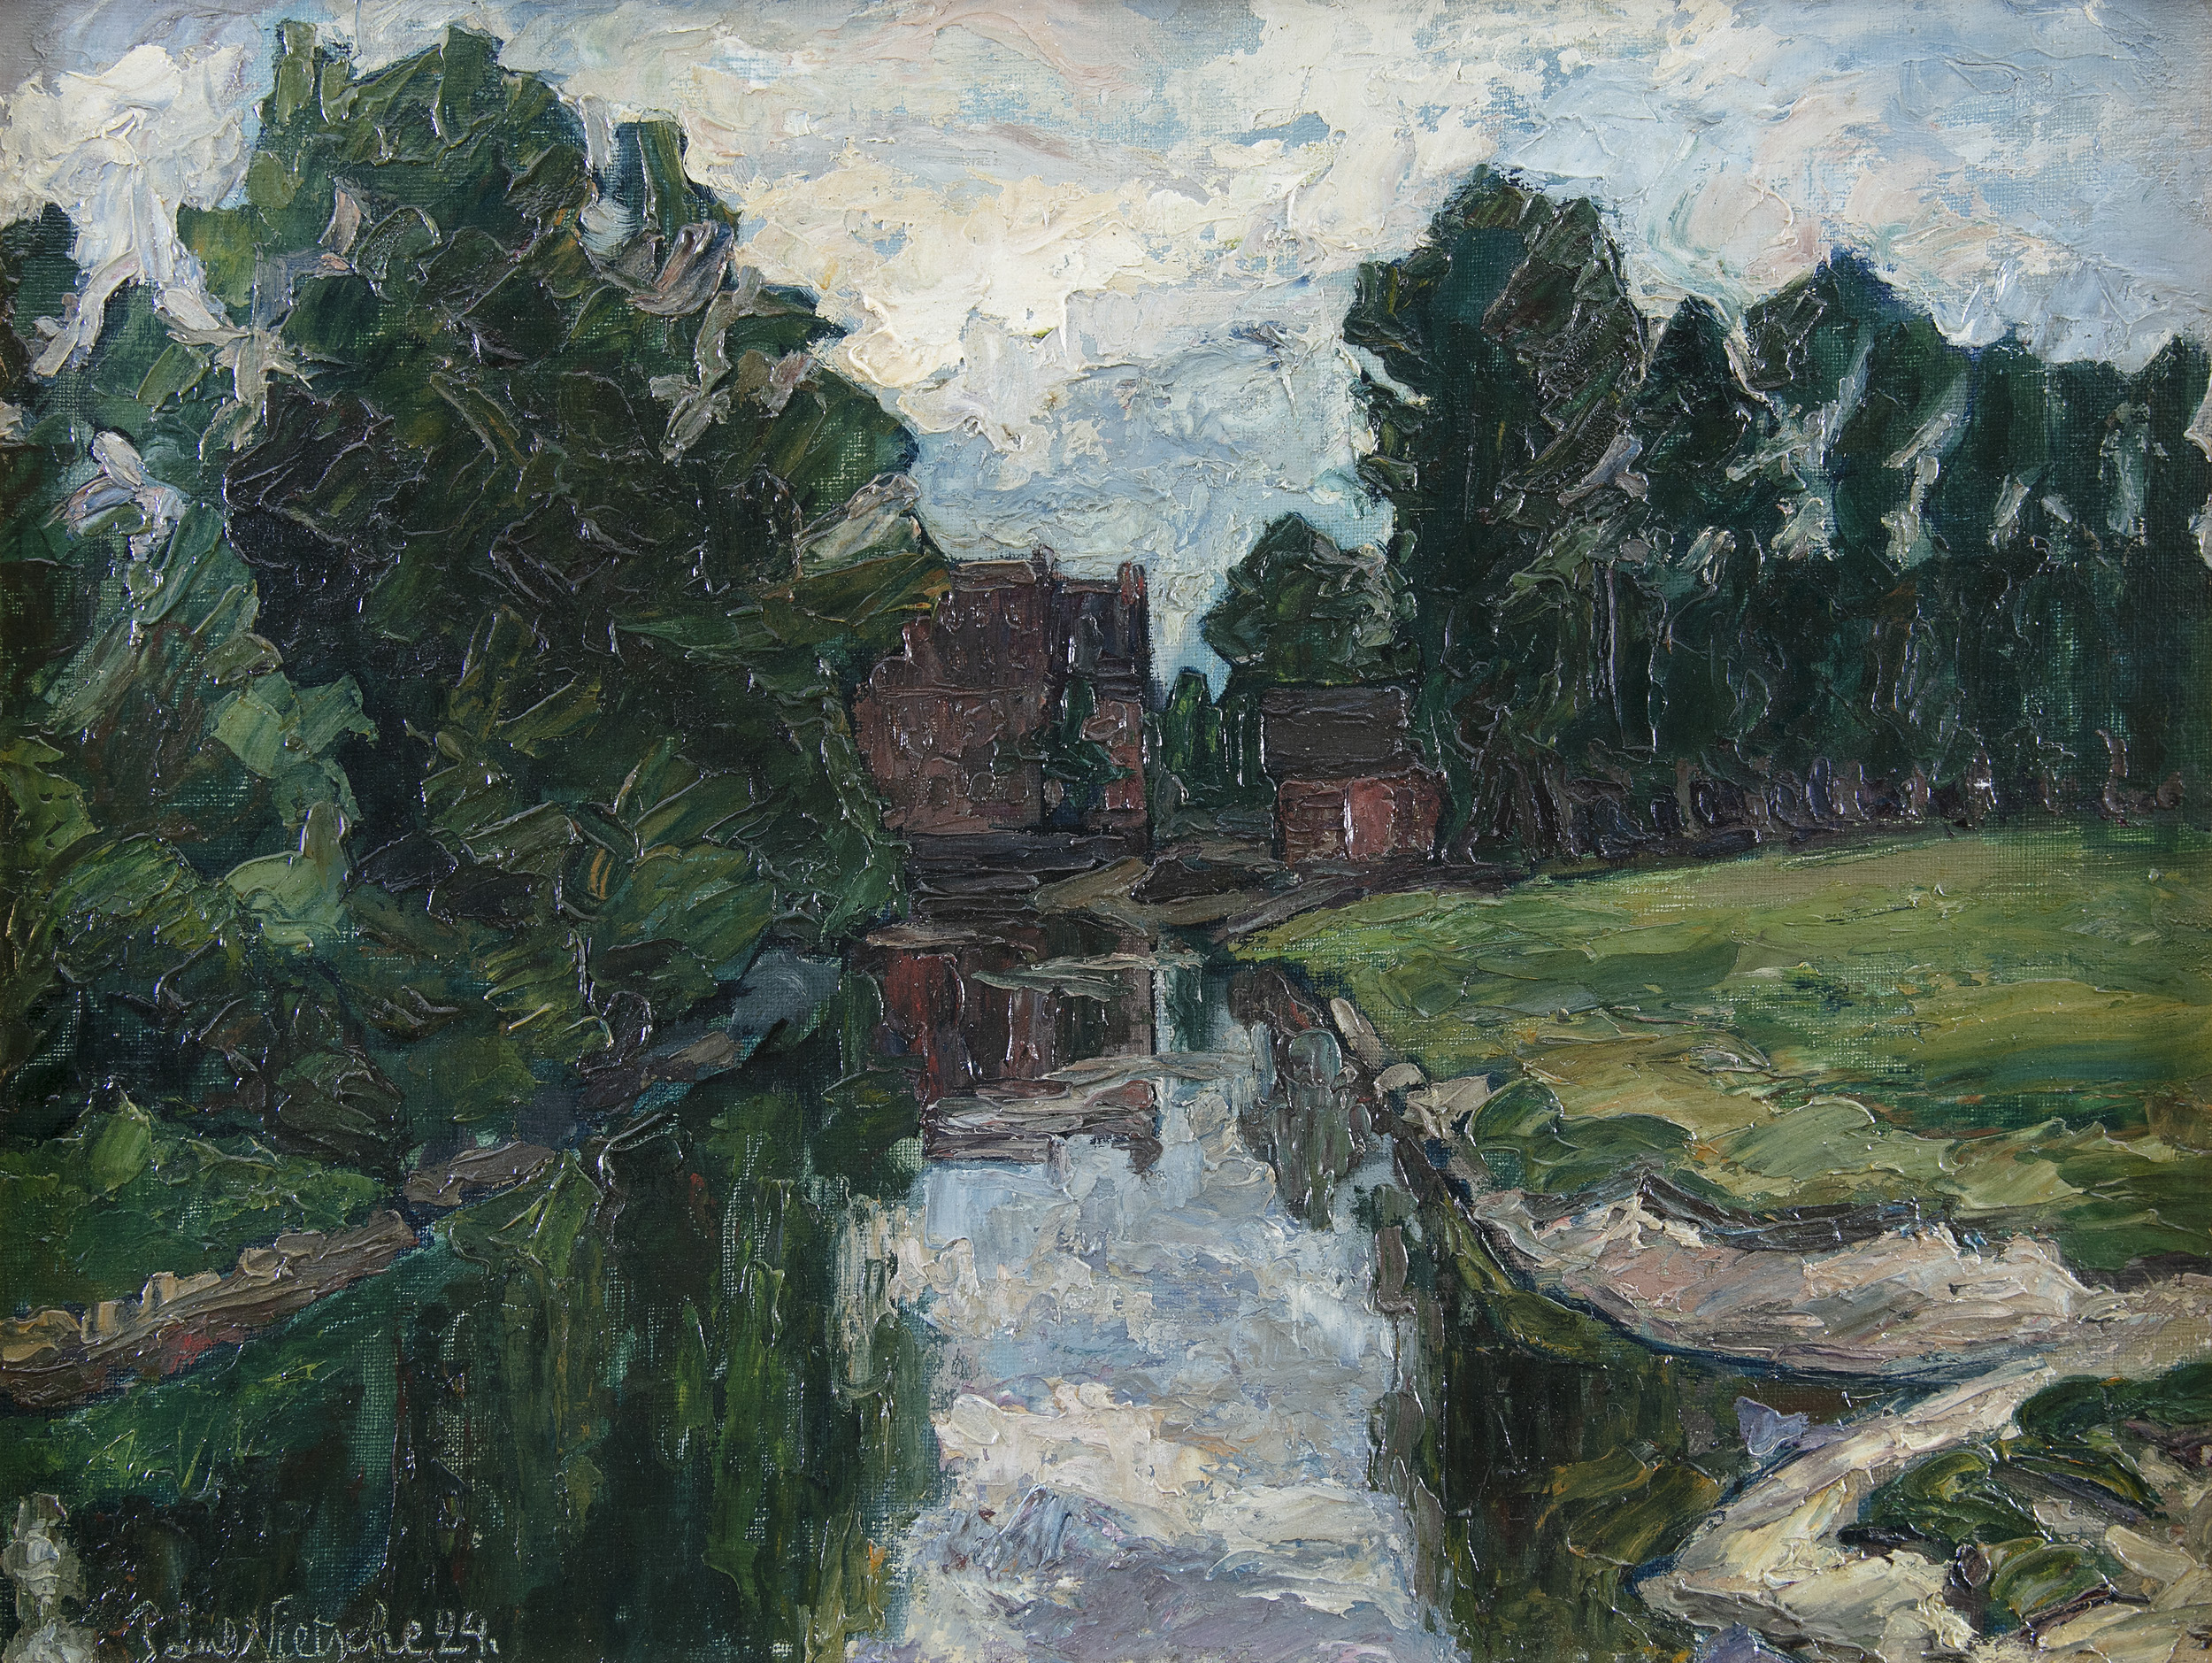 Paul Nietsche RUA (1885-1950)Wooded Landscape with Small RiverOil on wood, 33 x 44cm (13 x 17¼'')